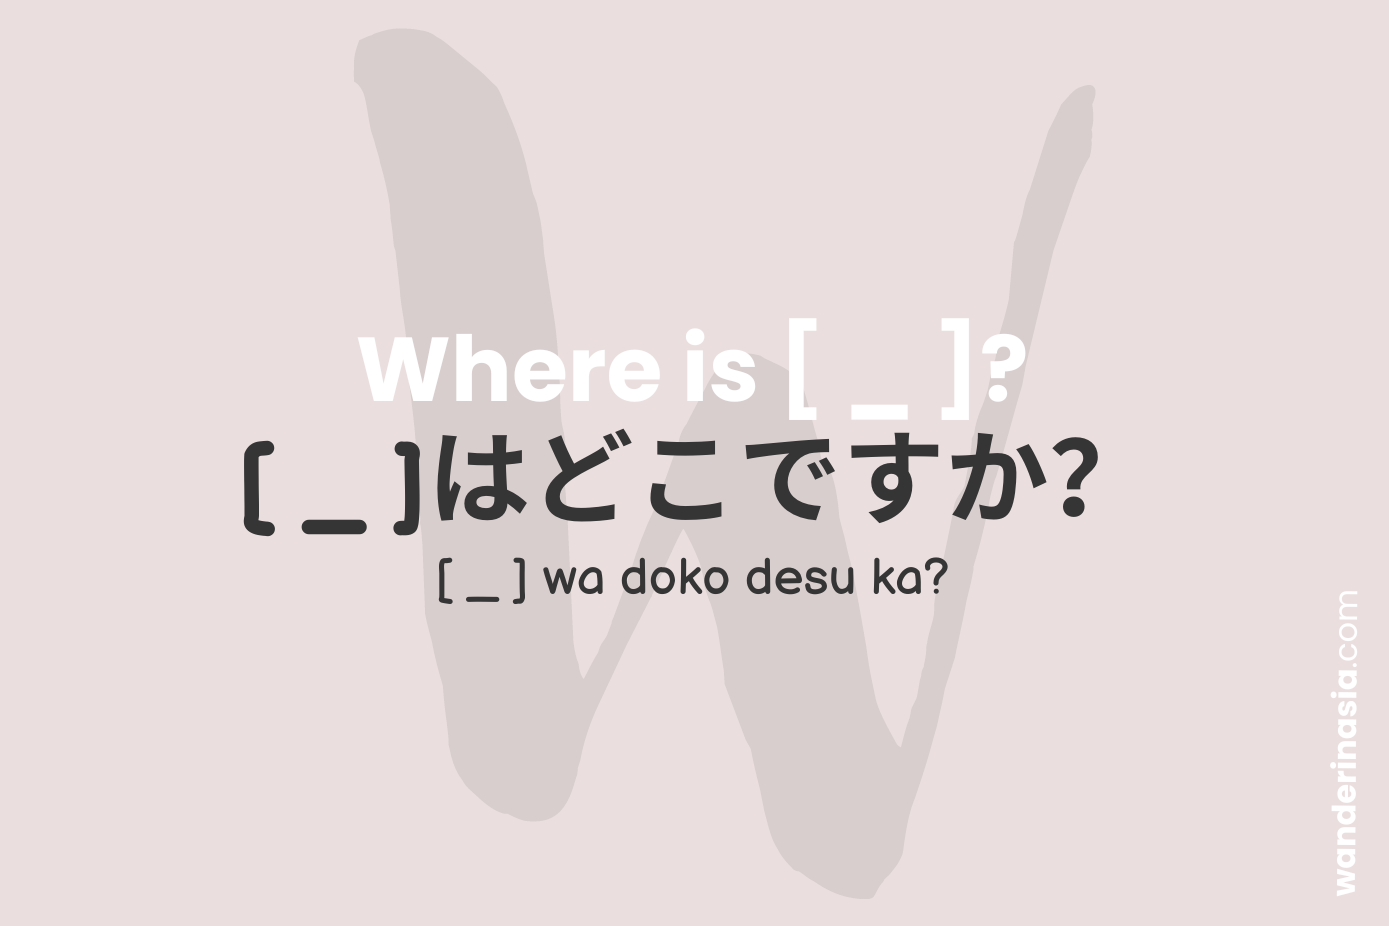 Where is